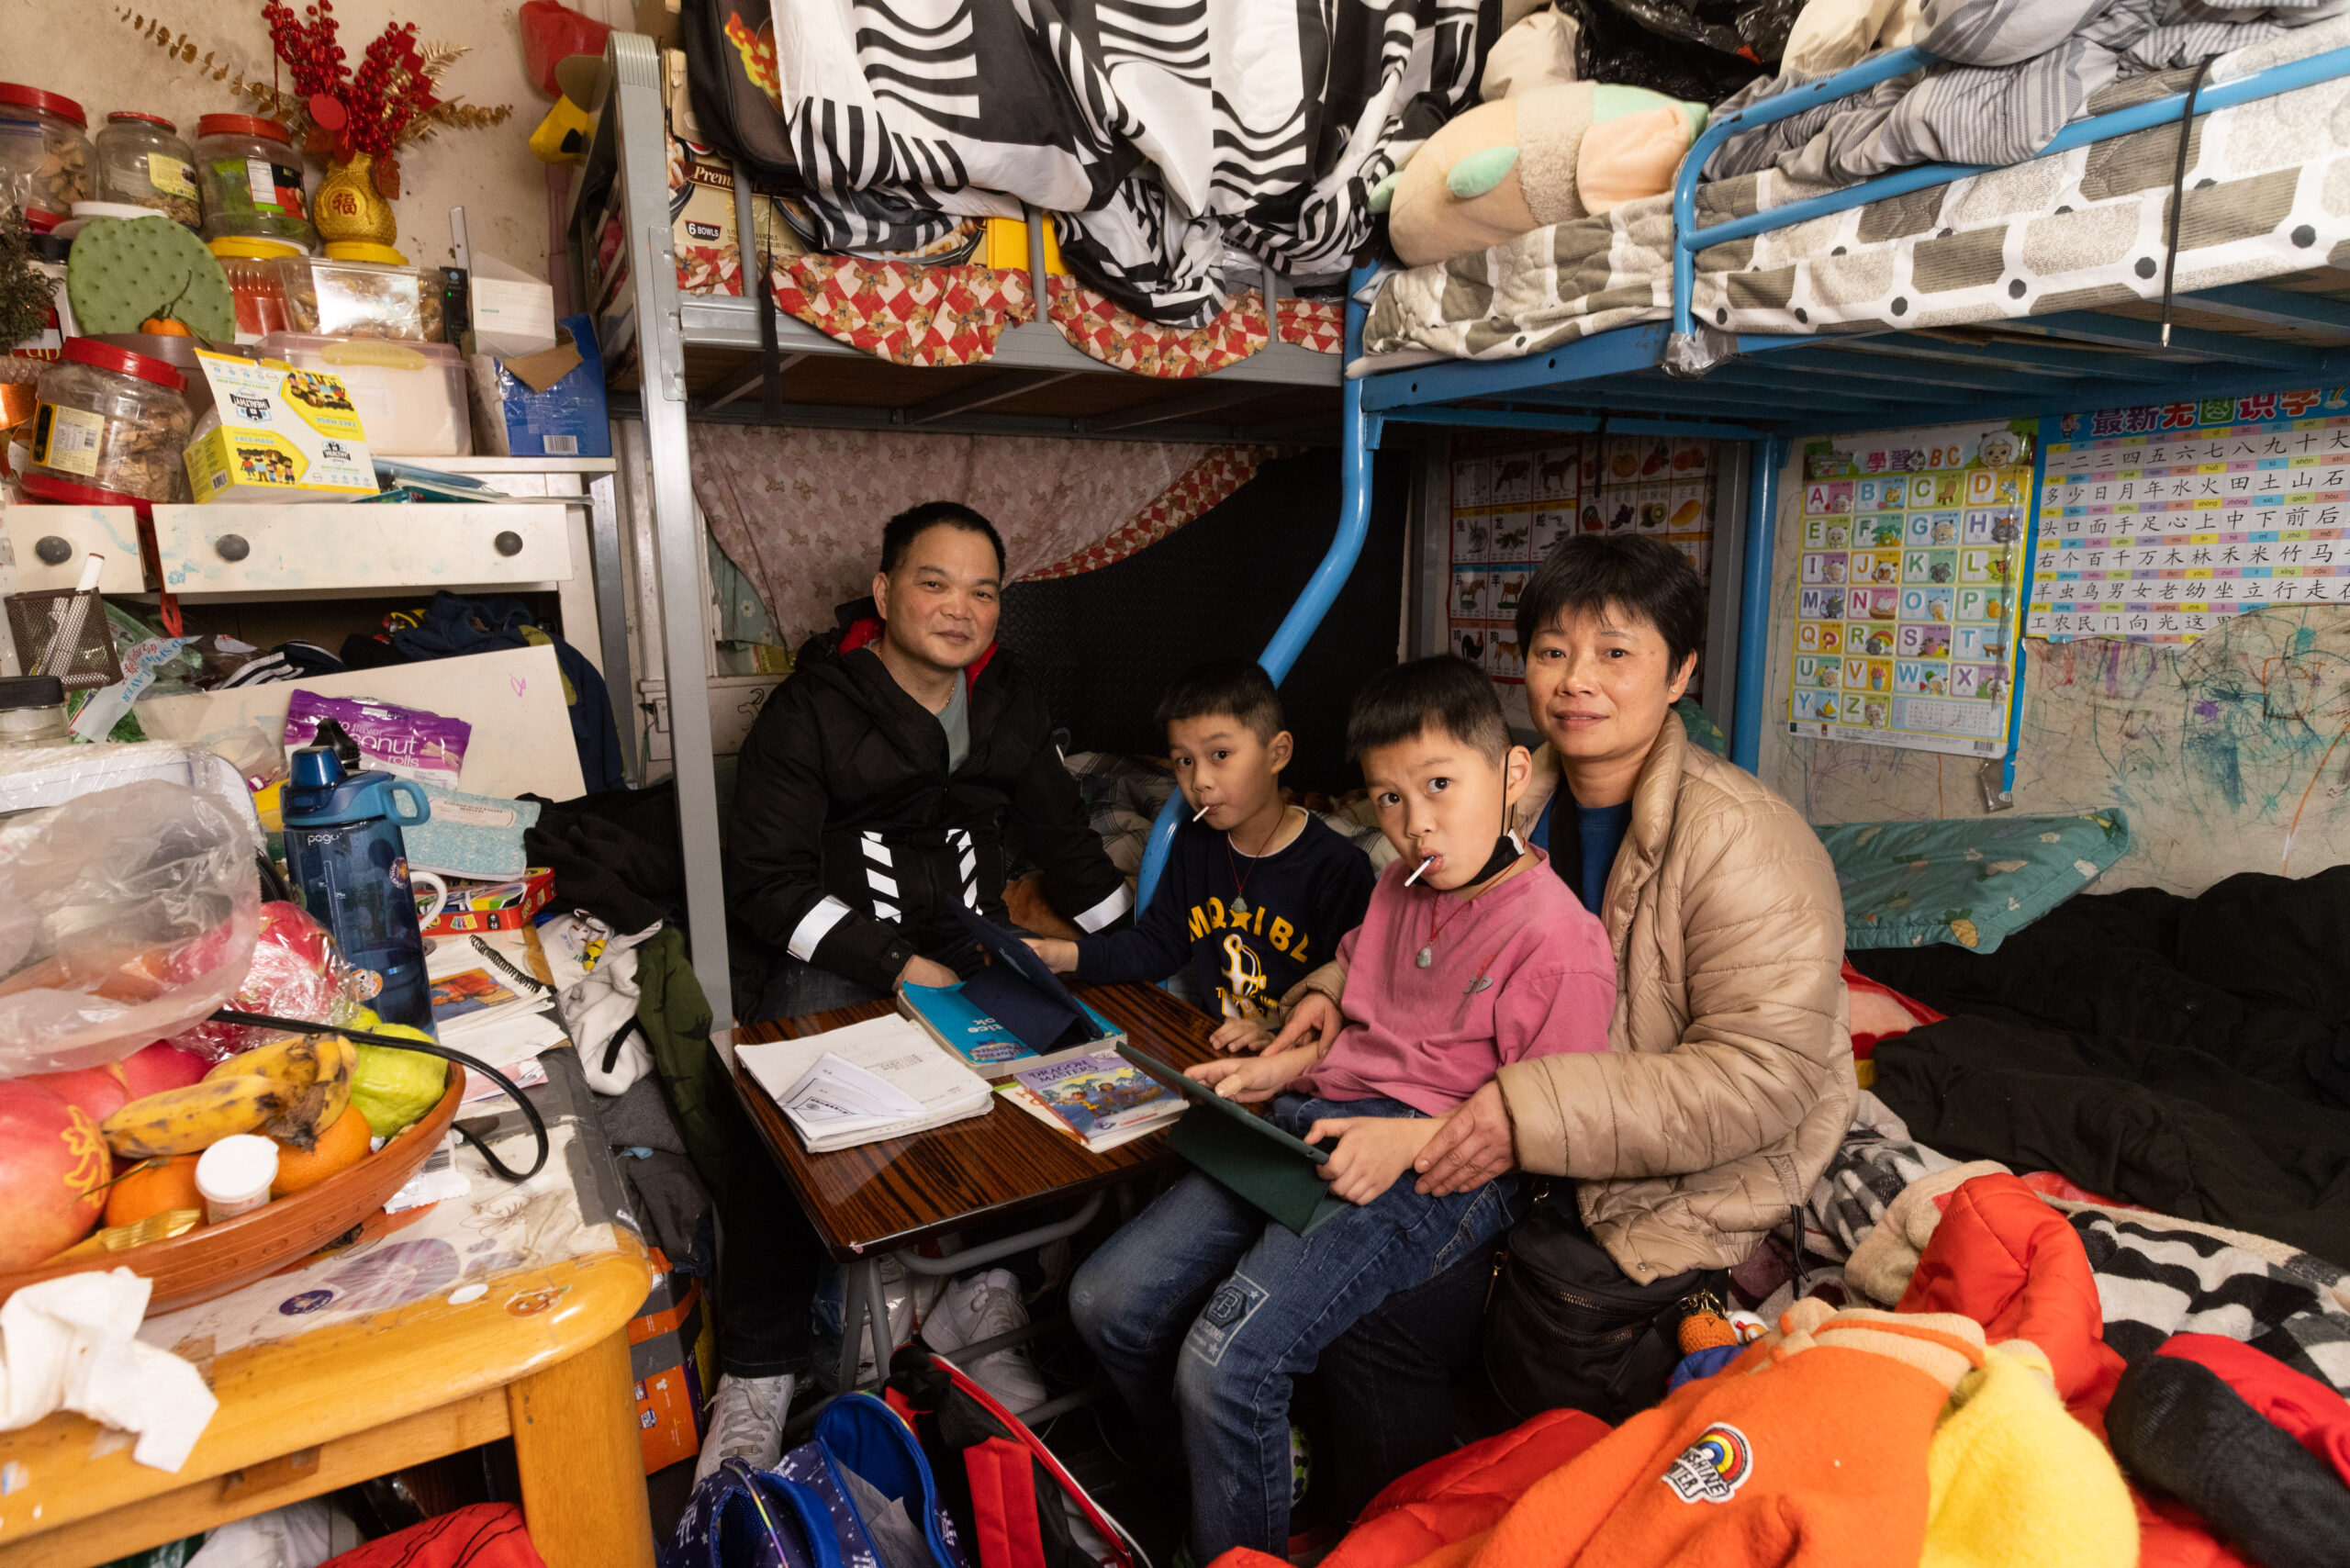 San Francisco Fights To Move Vulnerable Chinatown Families Out of Unsuitable Housing